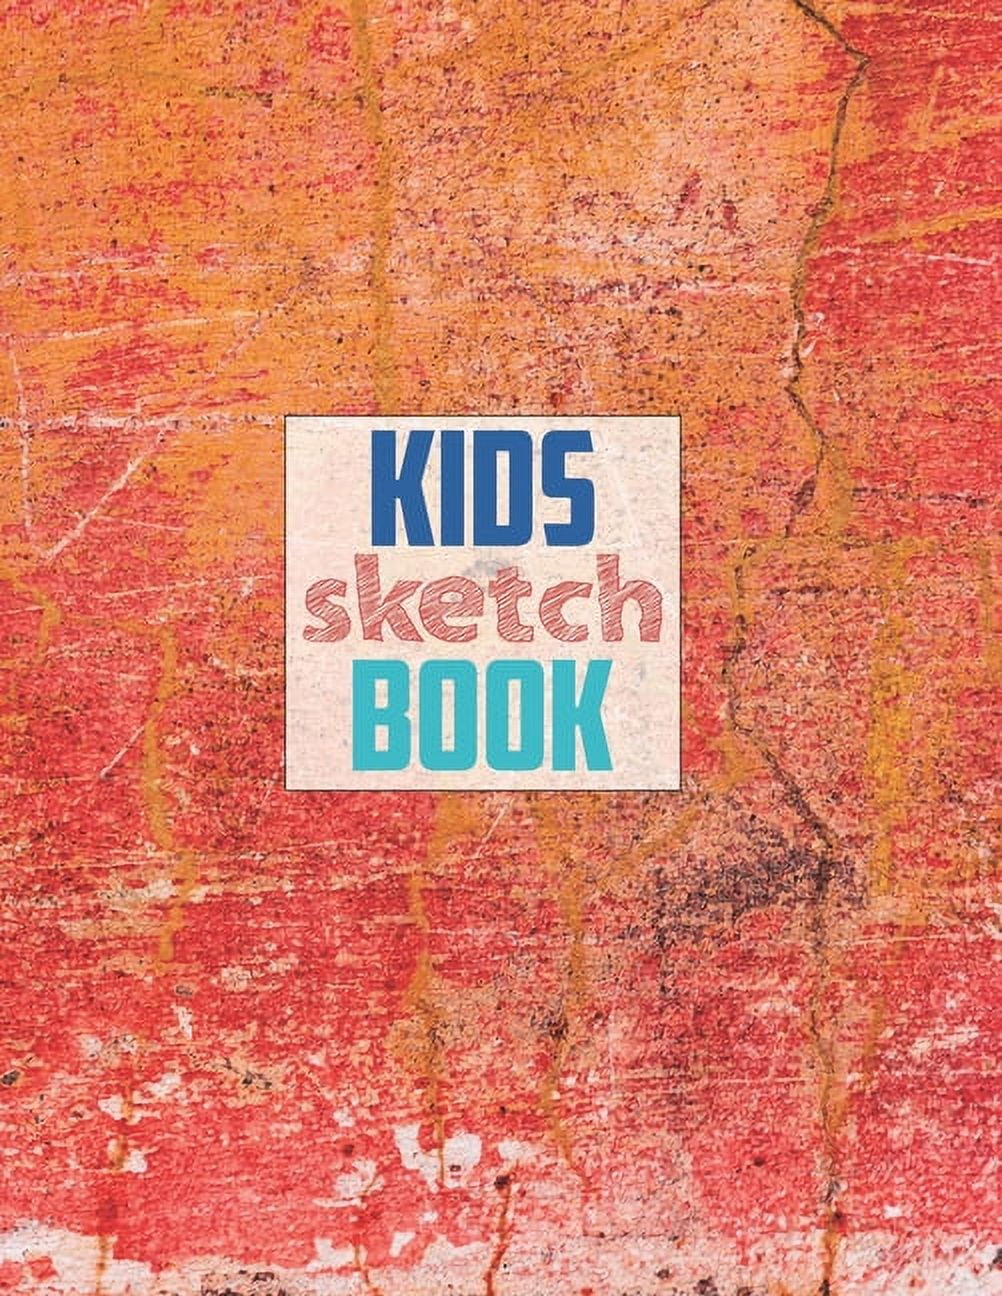 Drawing Pad for Kids: Sketch Book for Kids Ages 4-8, 8-12 for Boy Son 4, 5,  6, 7, 8, 9, 10, 11, 12 Year Old , 100 Blank Paper to Practice Drawing